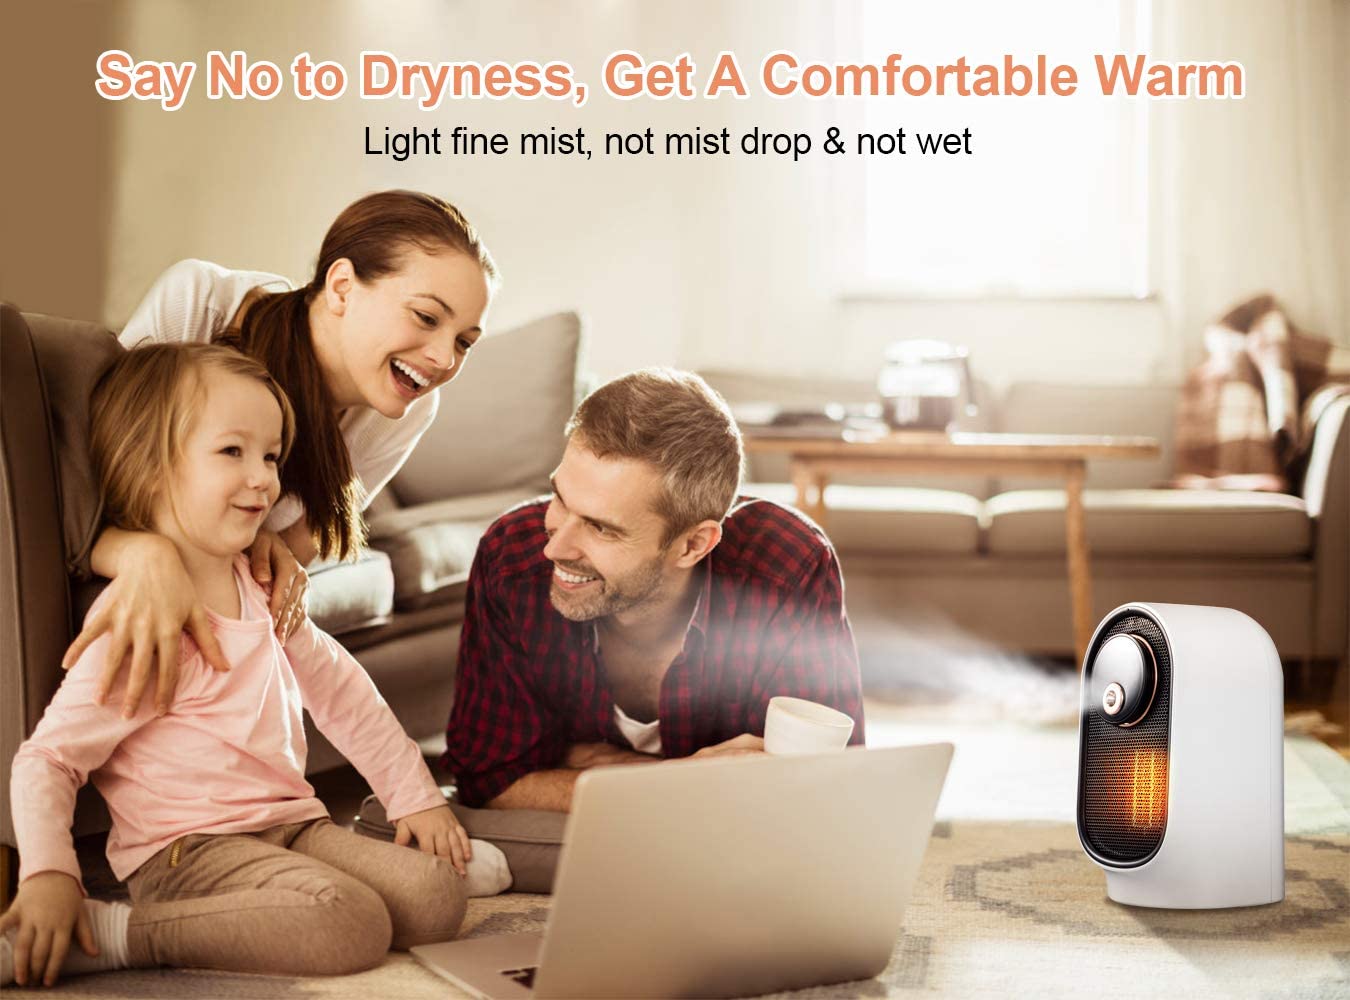 800W Space Heater with humidifier, 90° Oscillating, 200mL water tank capacity, Overheat & Tip-Over Protection